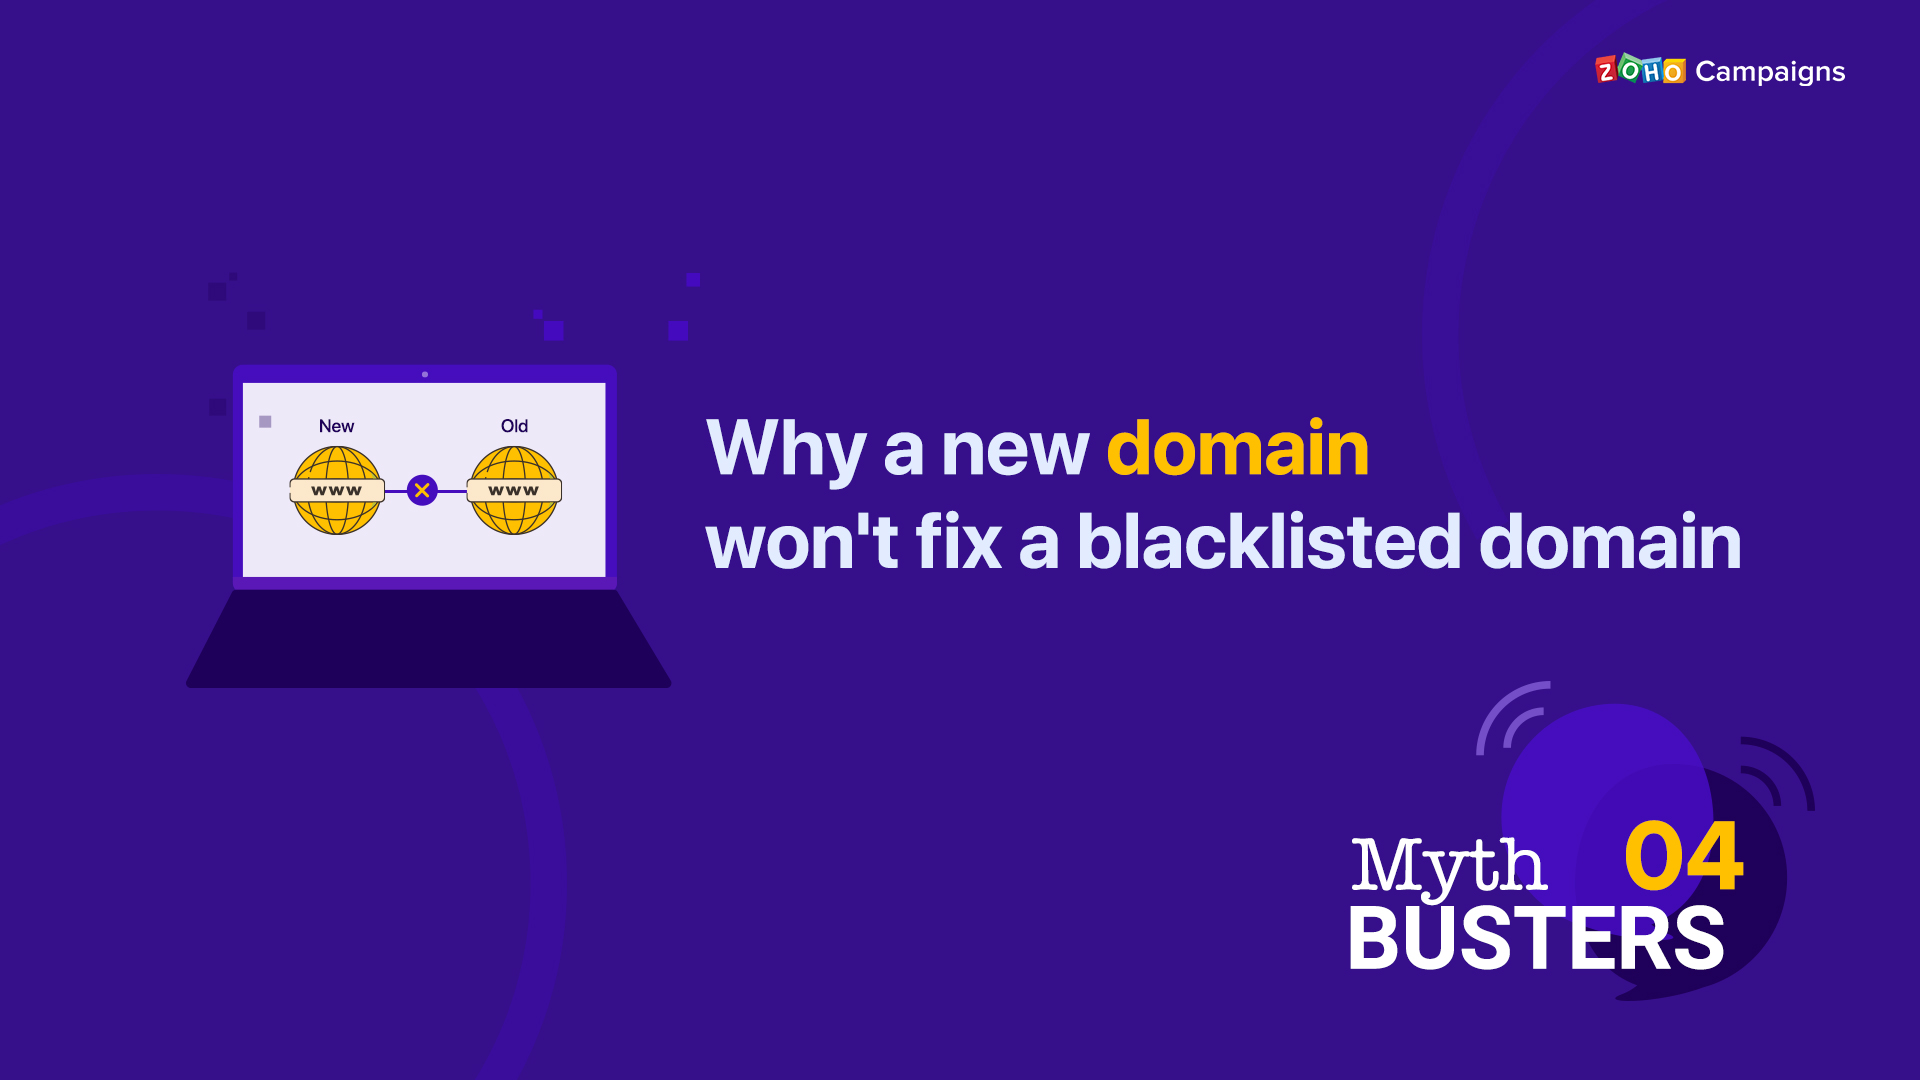 Why a new domain won't fix a blacklisted domain